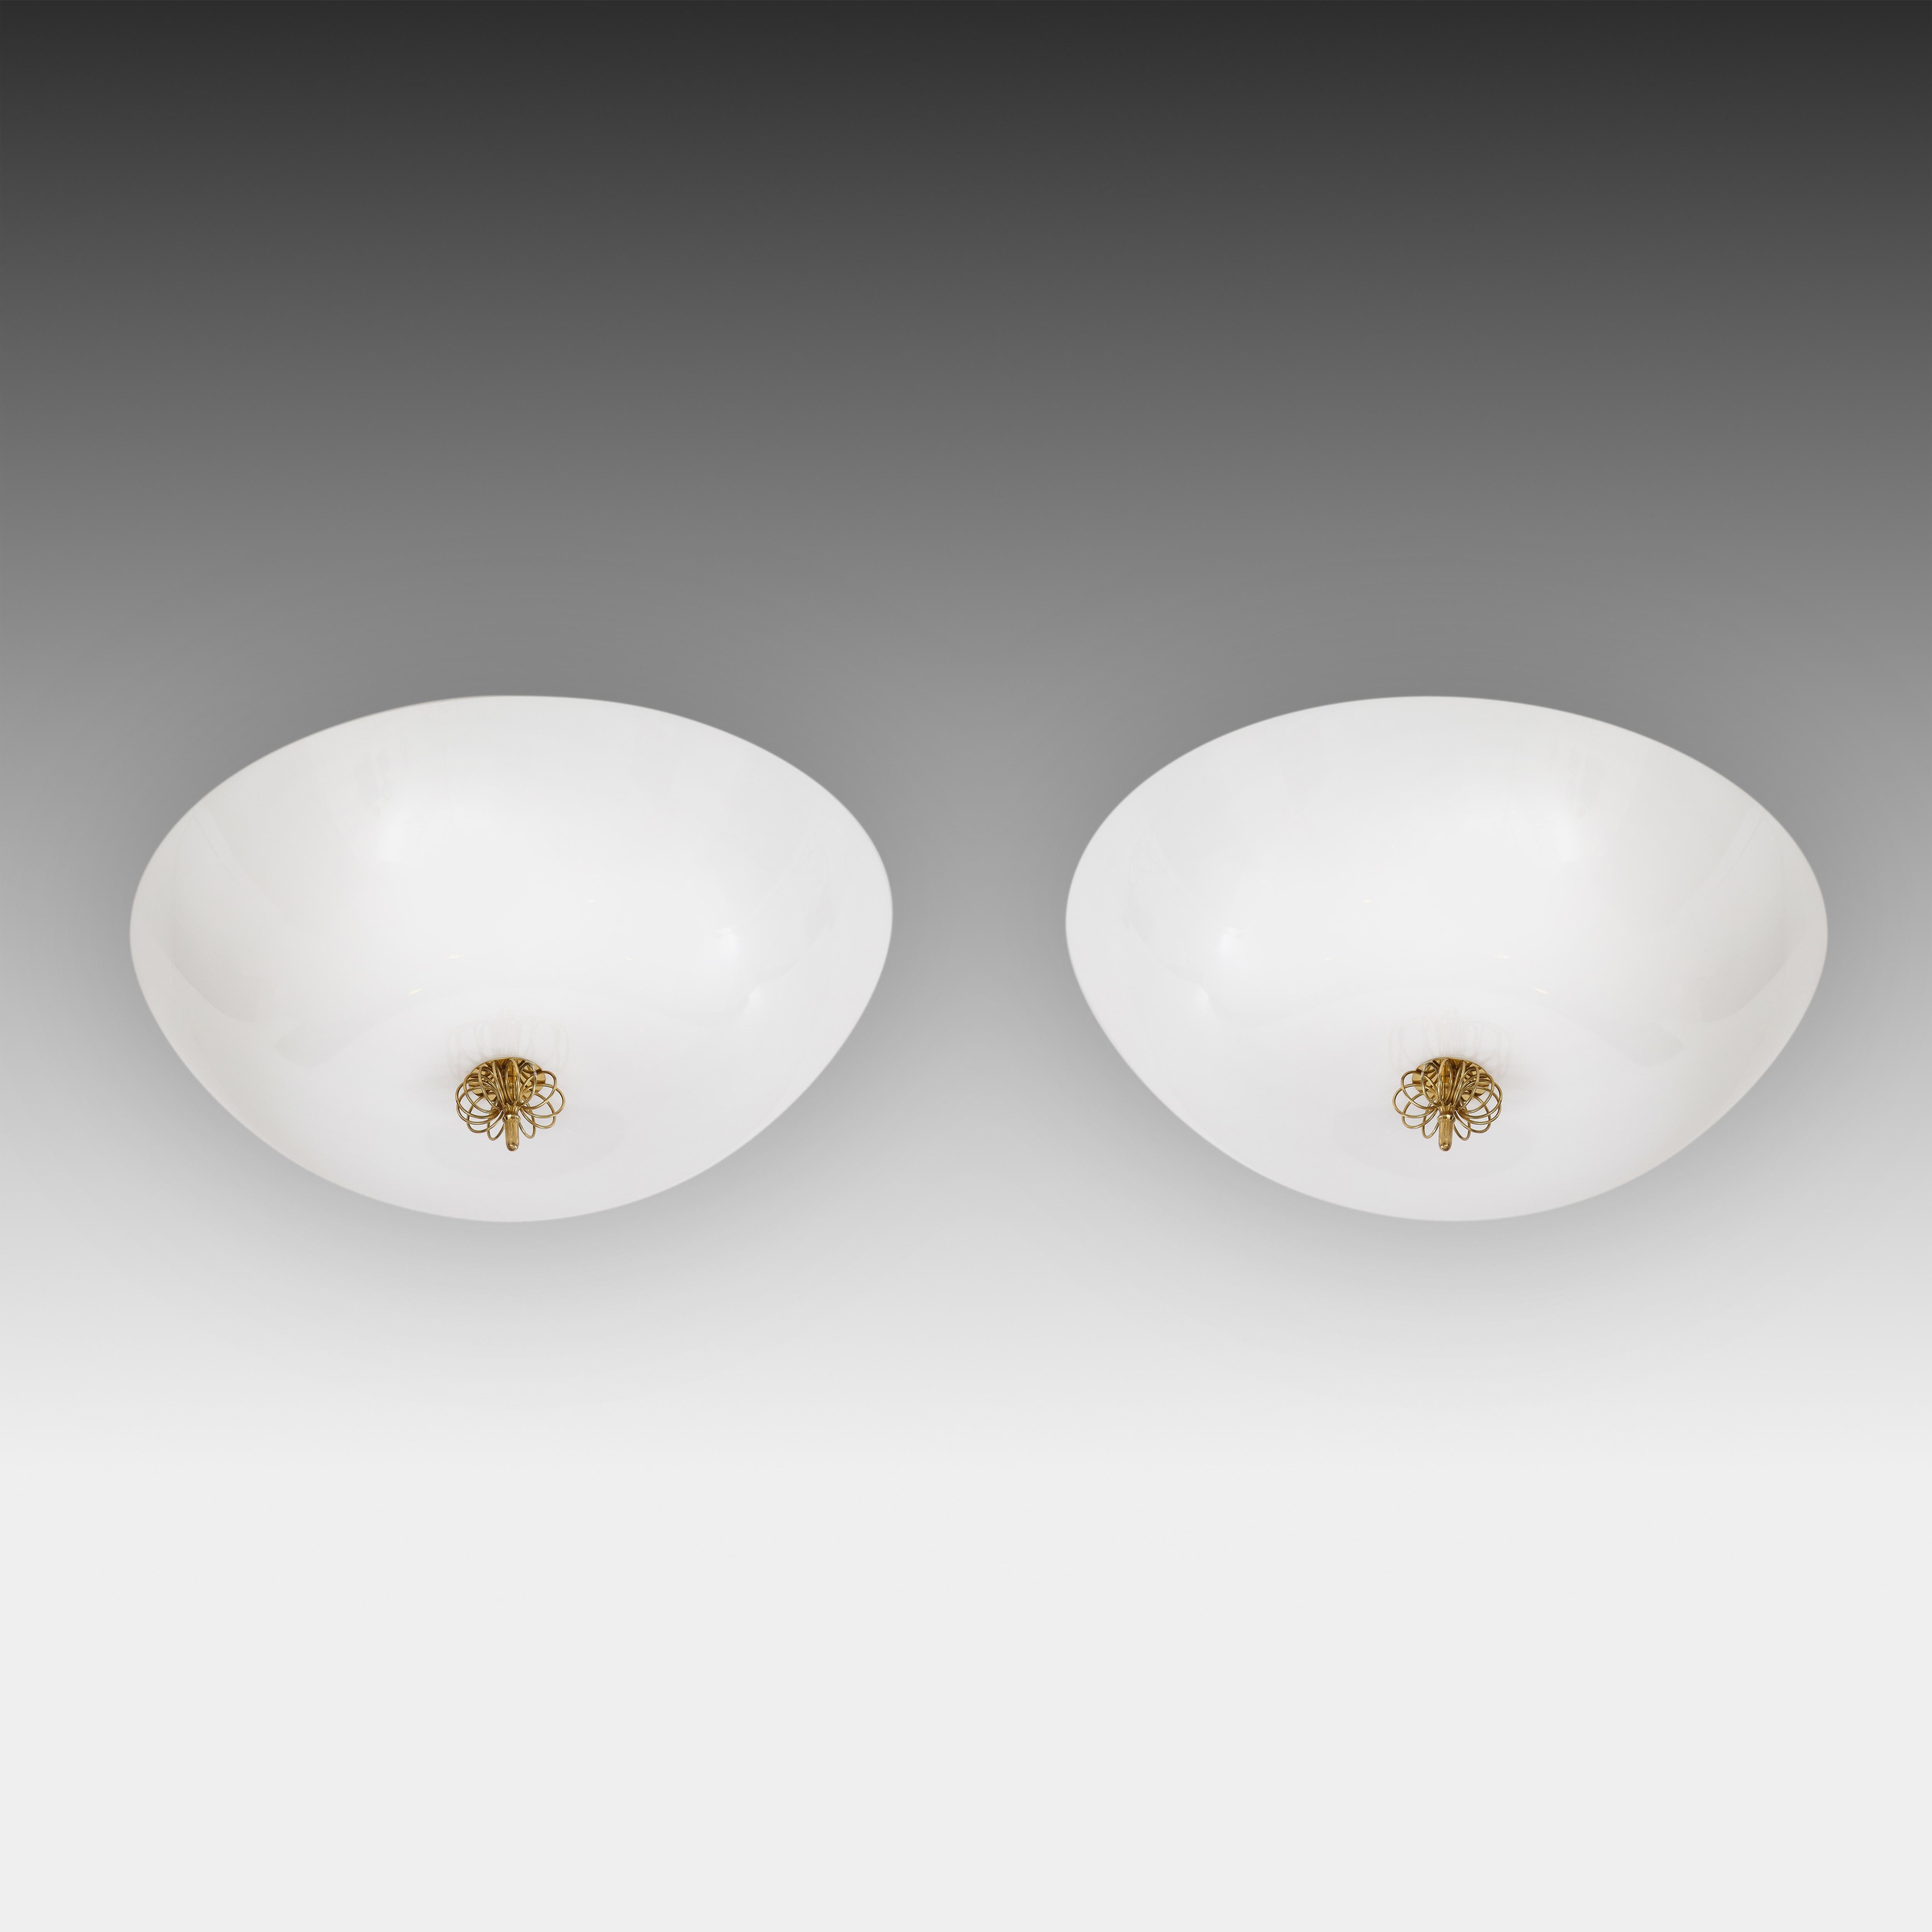 Mid-Century Modern Paavo Tynell Rare Flush Mount Ceiling Lights Model 2093, Finland, 1950s For Sale